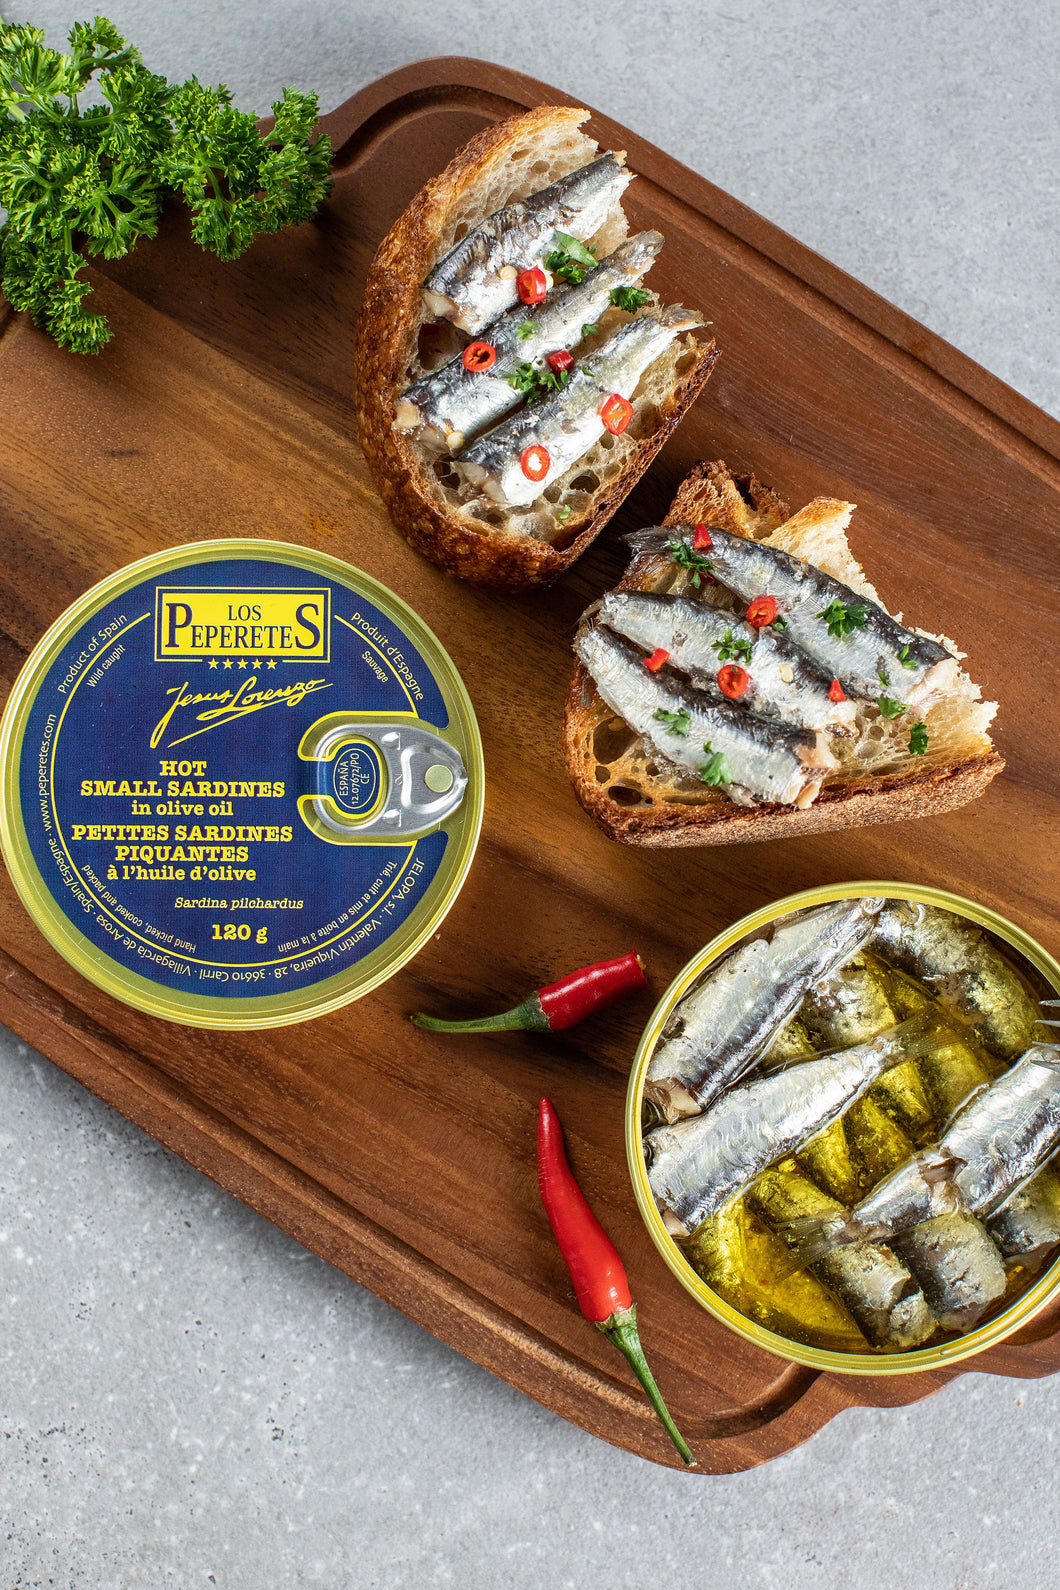 Los Peperetes Hot Small Sardines in Olive Oil